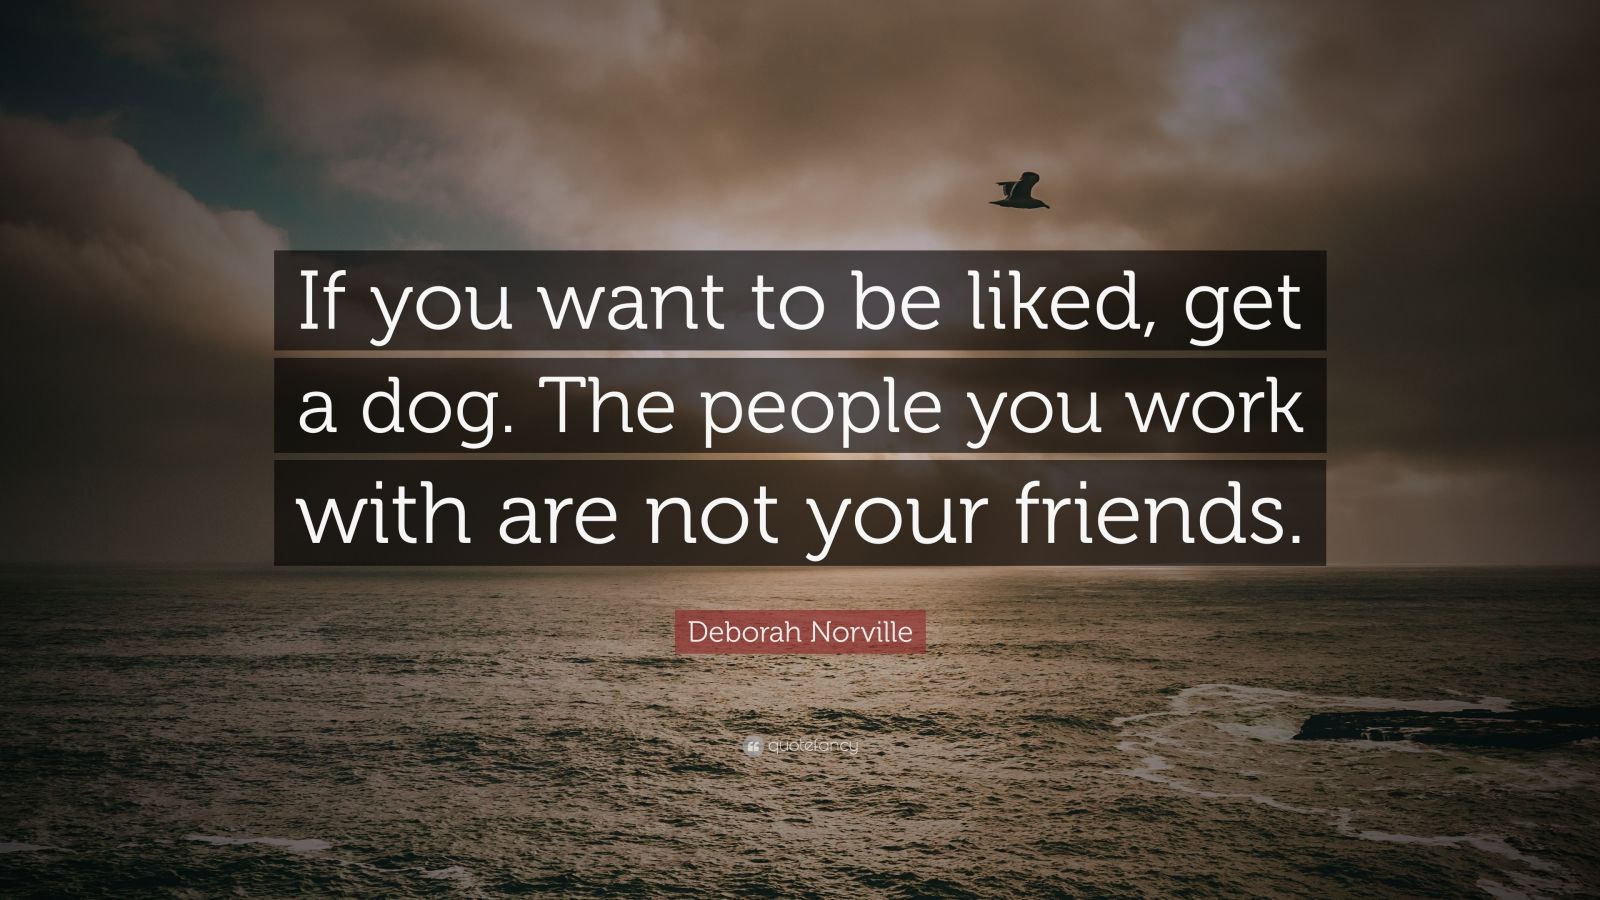 Deborah Norville Quote: “If you want to be liked, get a dog. The people ...